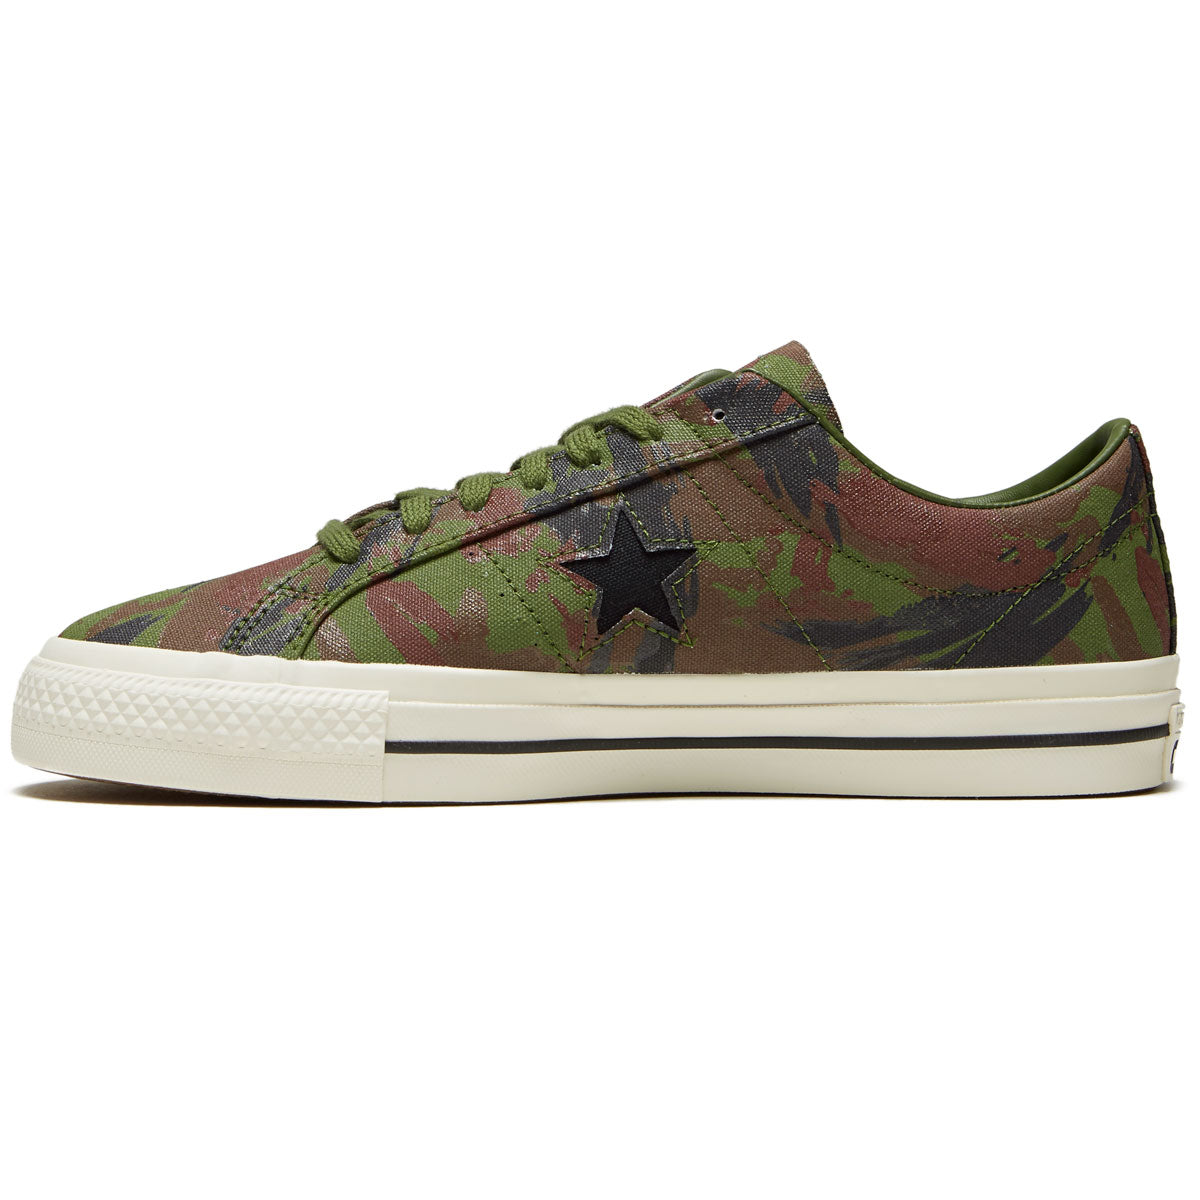 Converse One Star Pro Ox Shoes - Cypress Green/Black/Egret image 2